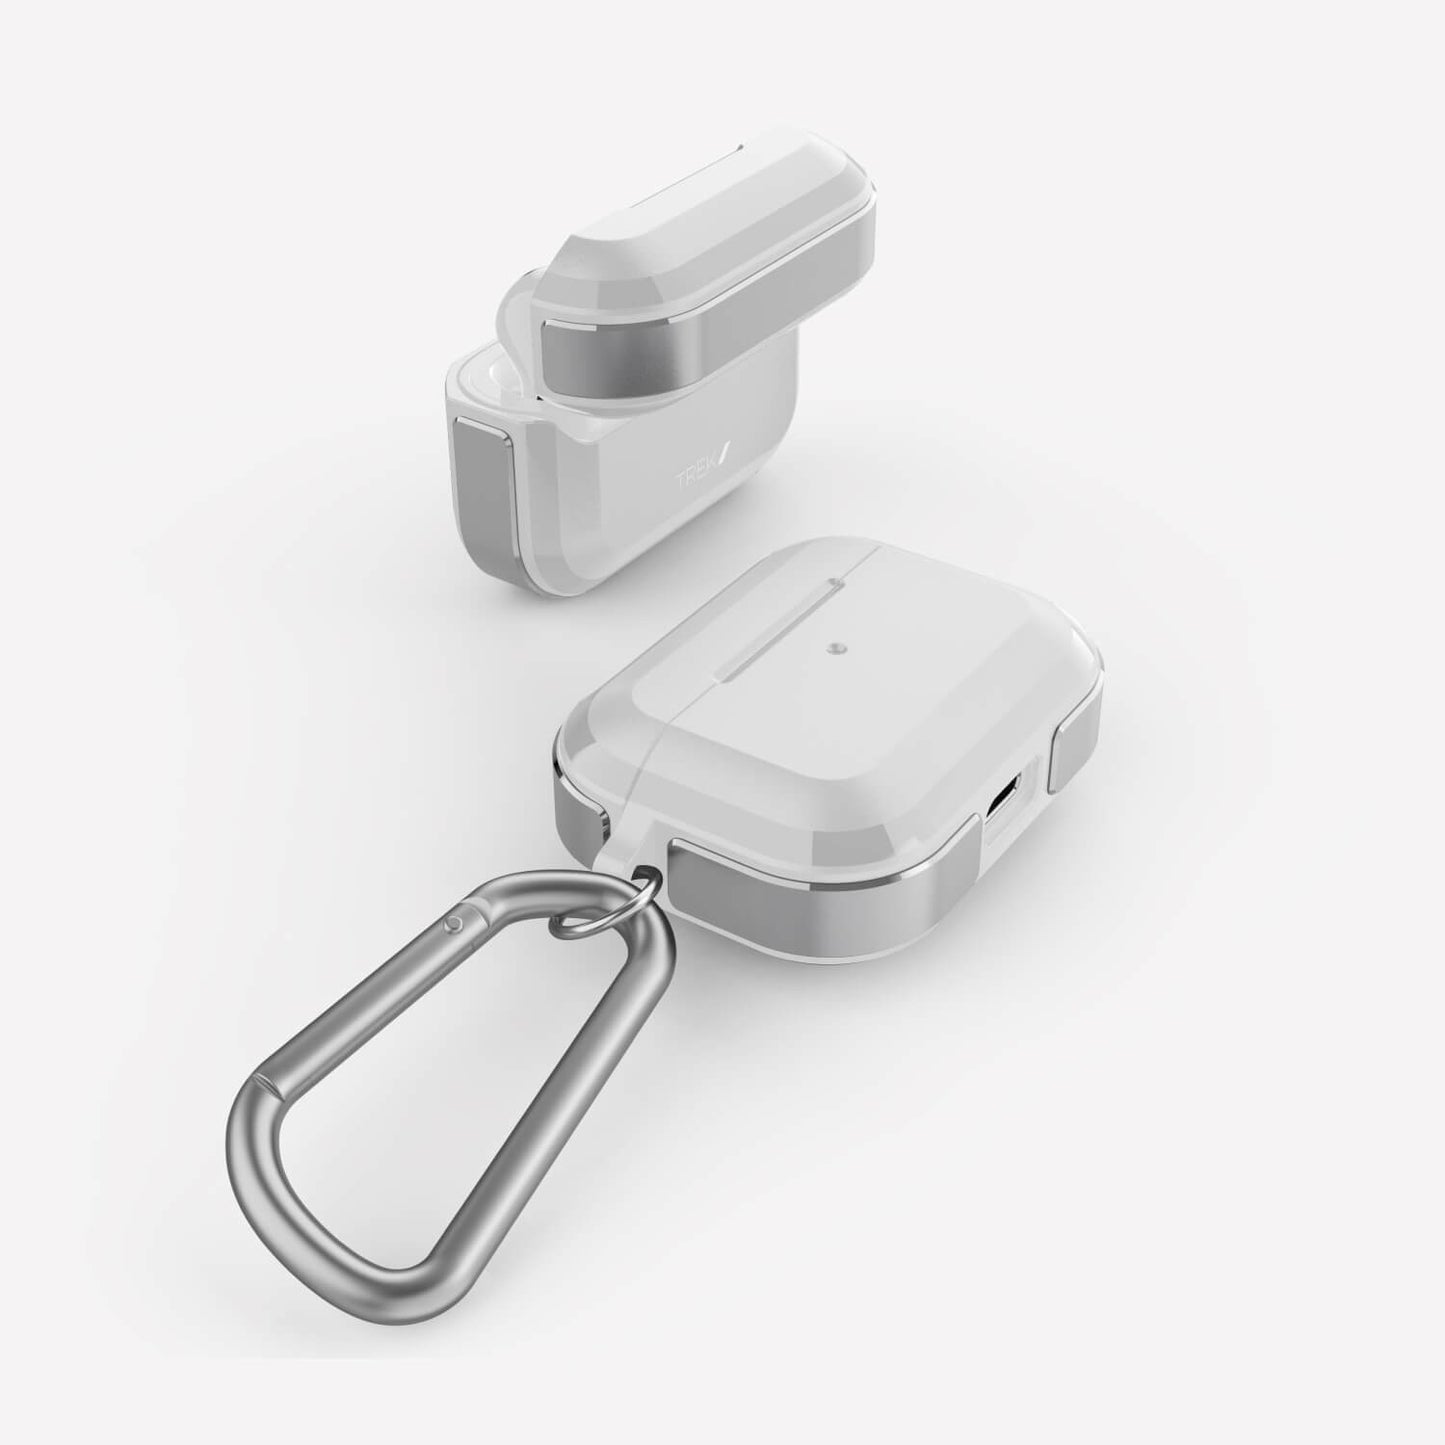 A pair of Raptic Apple AirPods Pro case with wireless charging capabilities and a carabiner attached for easy portability.